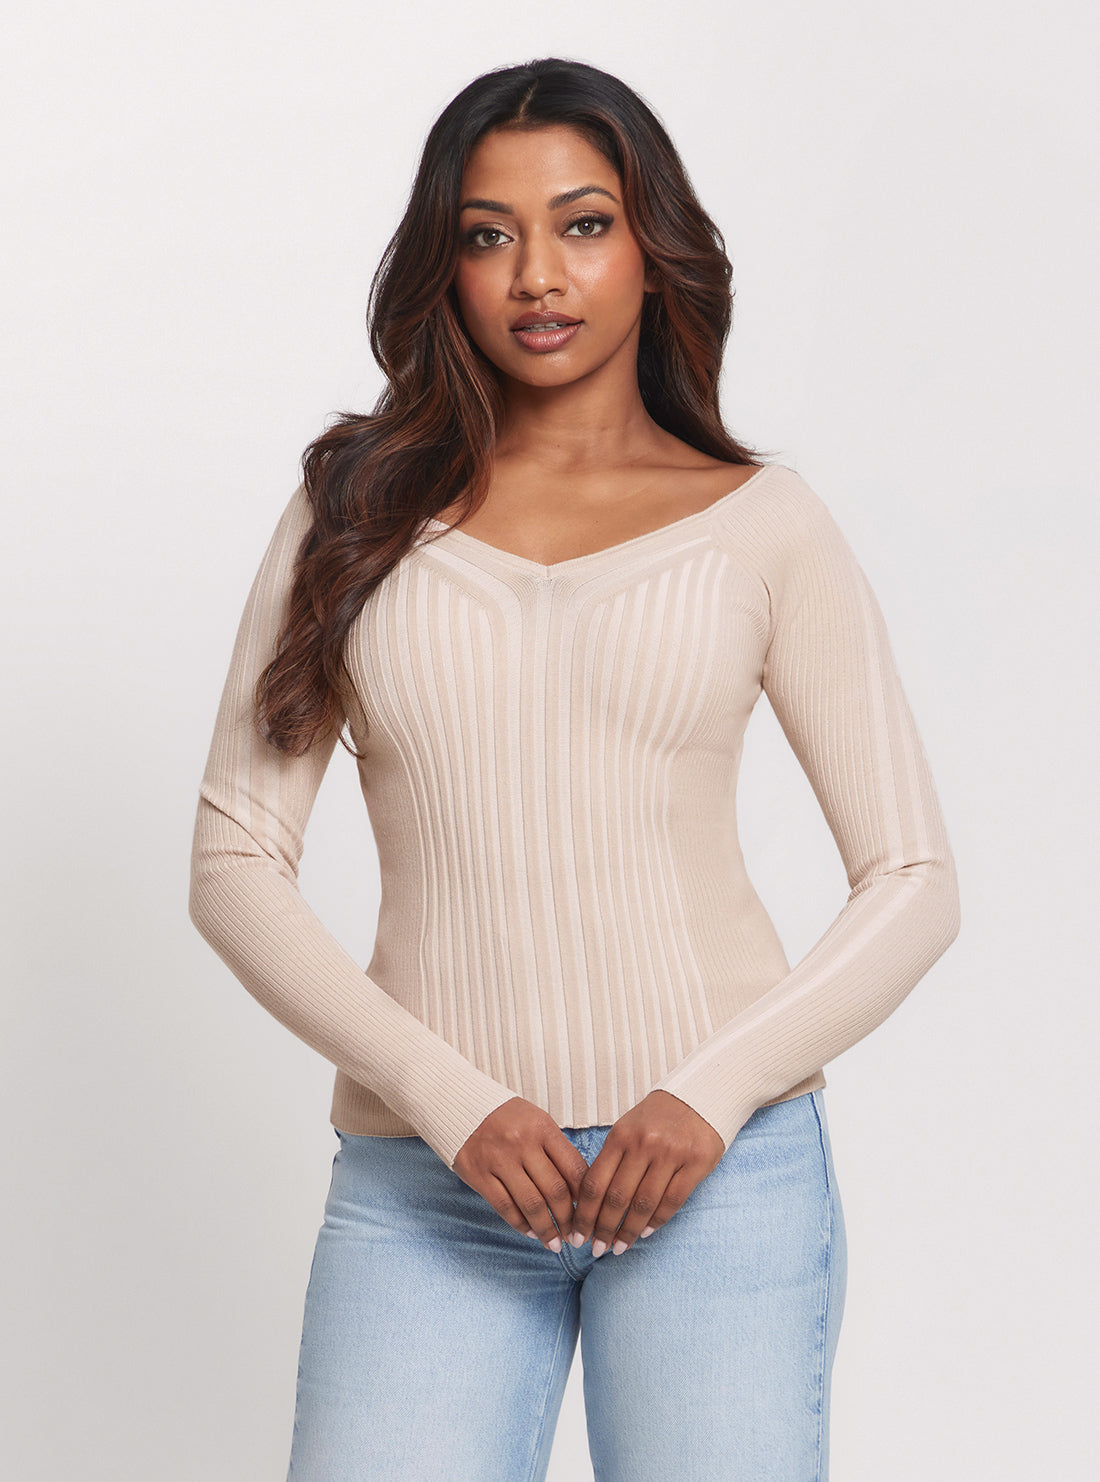 GUESS Beige Allie Long Sleeve Knit Top front view